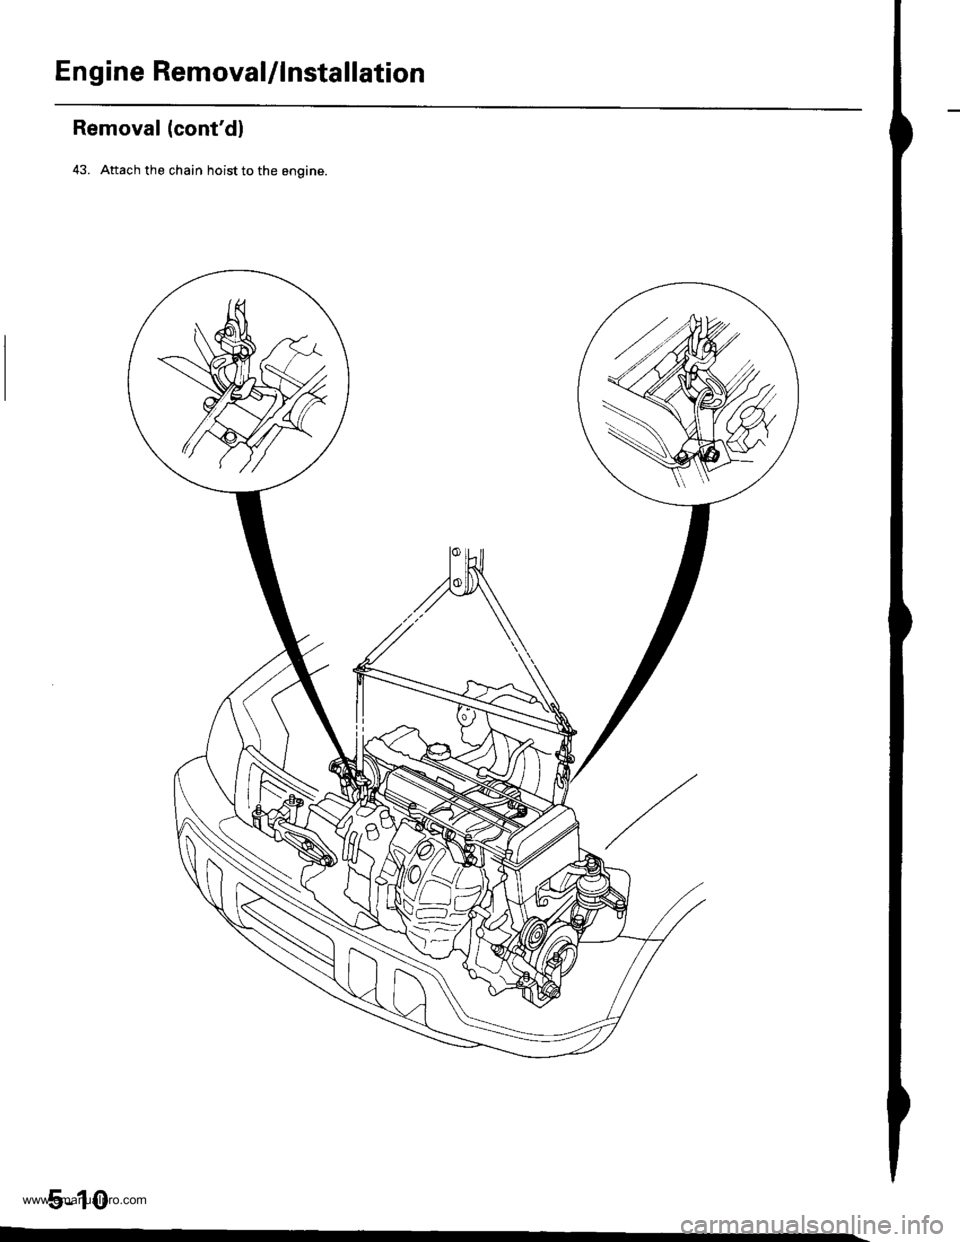 HONDA CR-V 1999 RD1-RD3 / 1.G Workshop Manual 
Engine RemovaUlnstallation
Removal (contdl
43. Attach the chain hoist to the engine.
5-10
www.emanualpro.com  